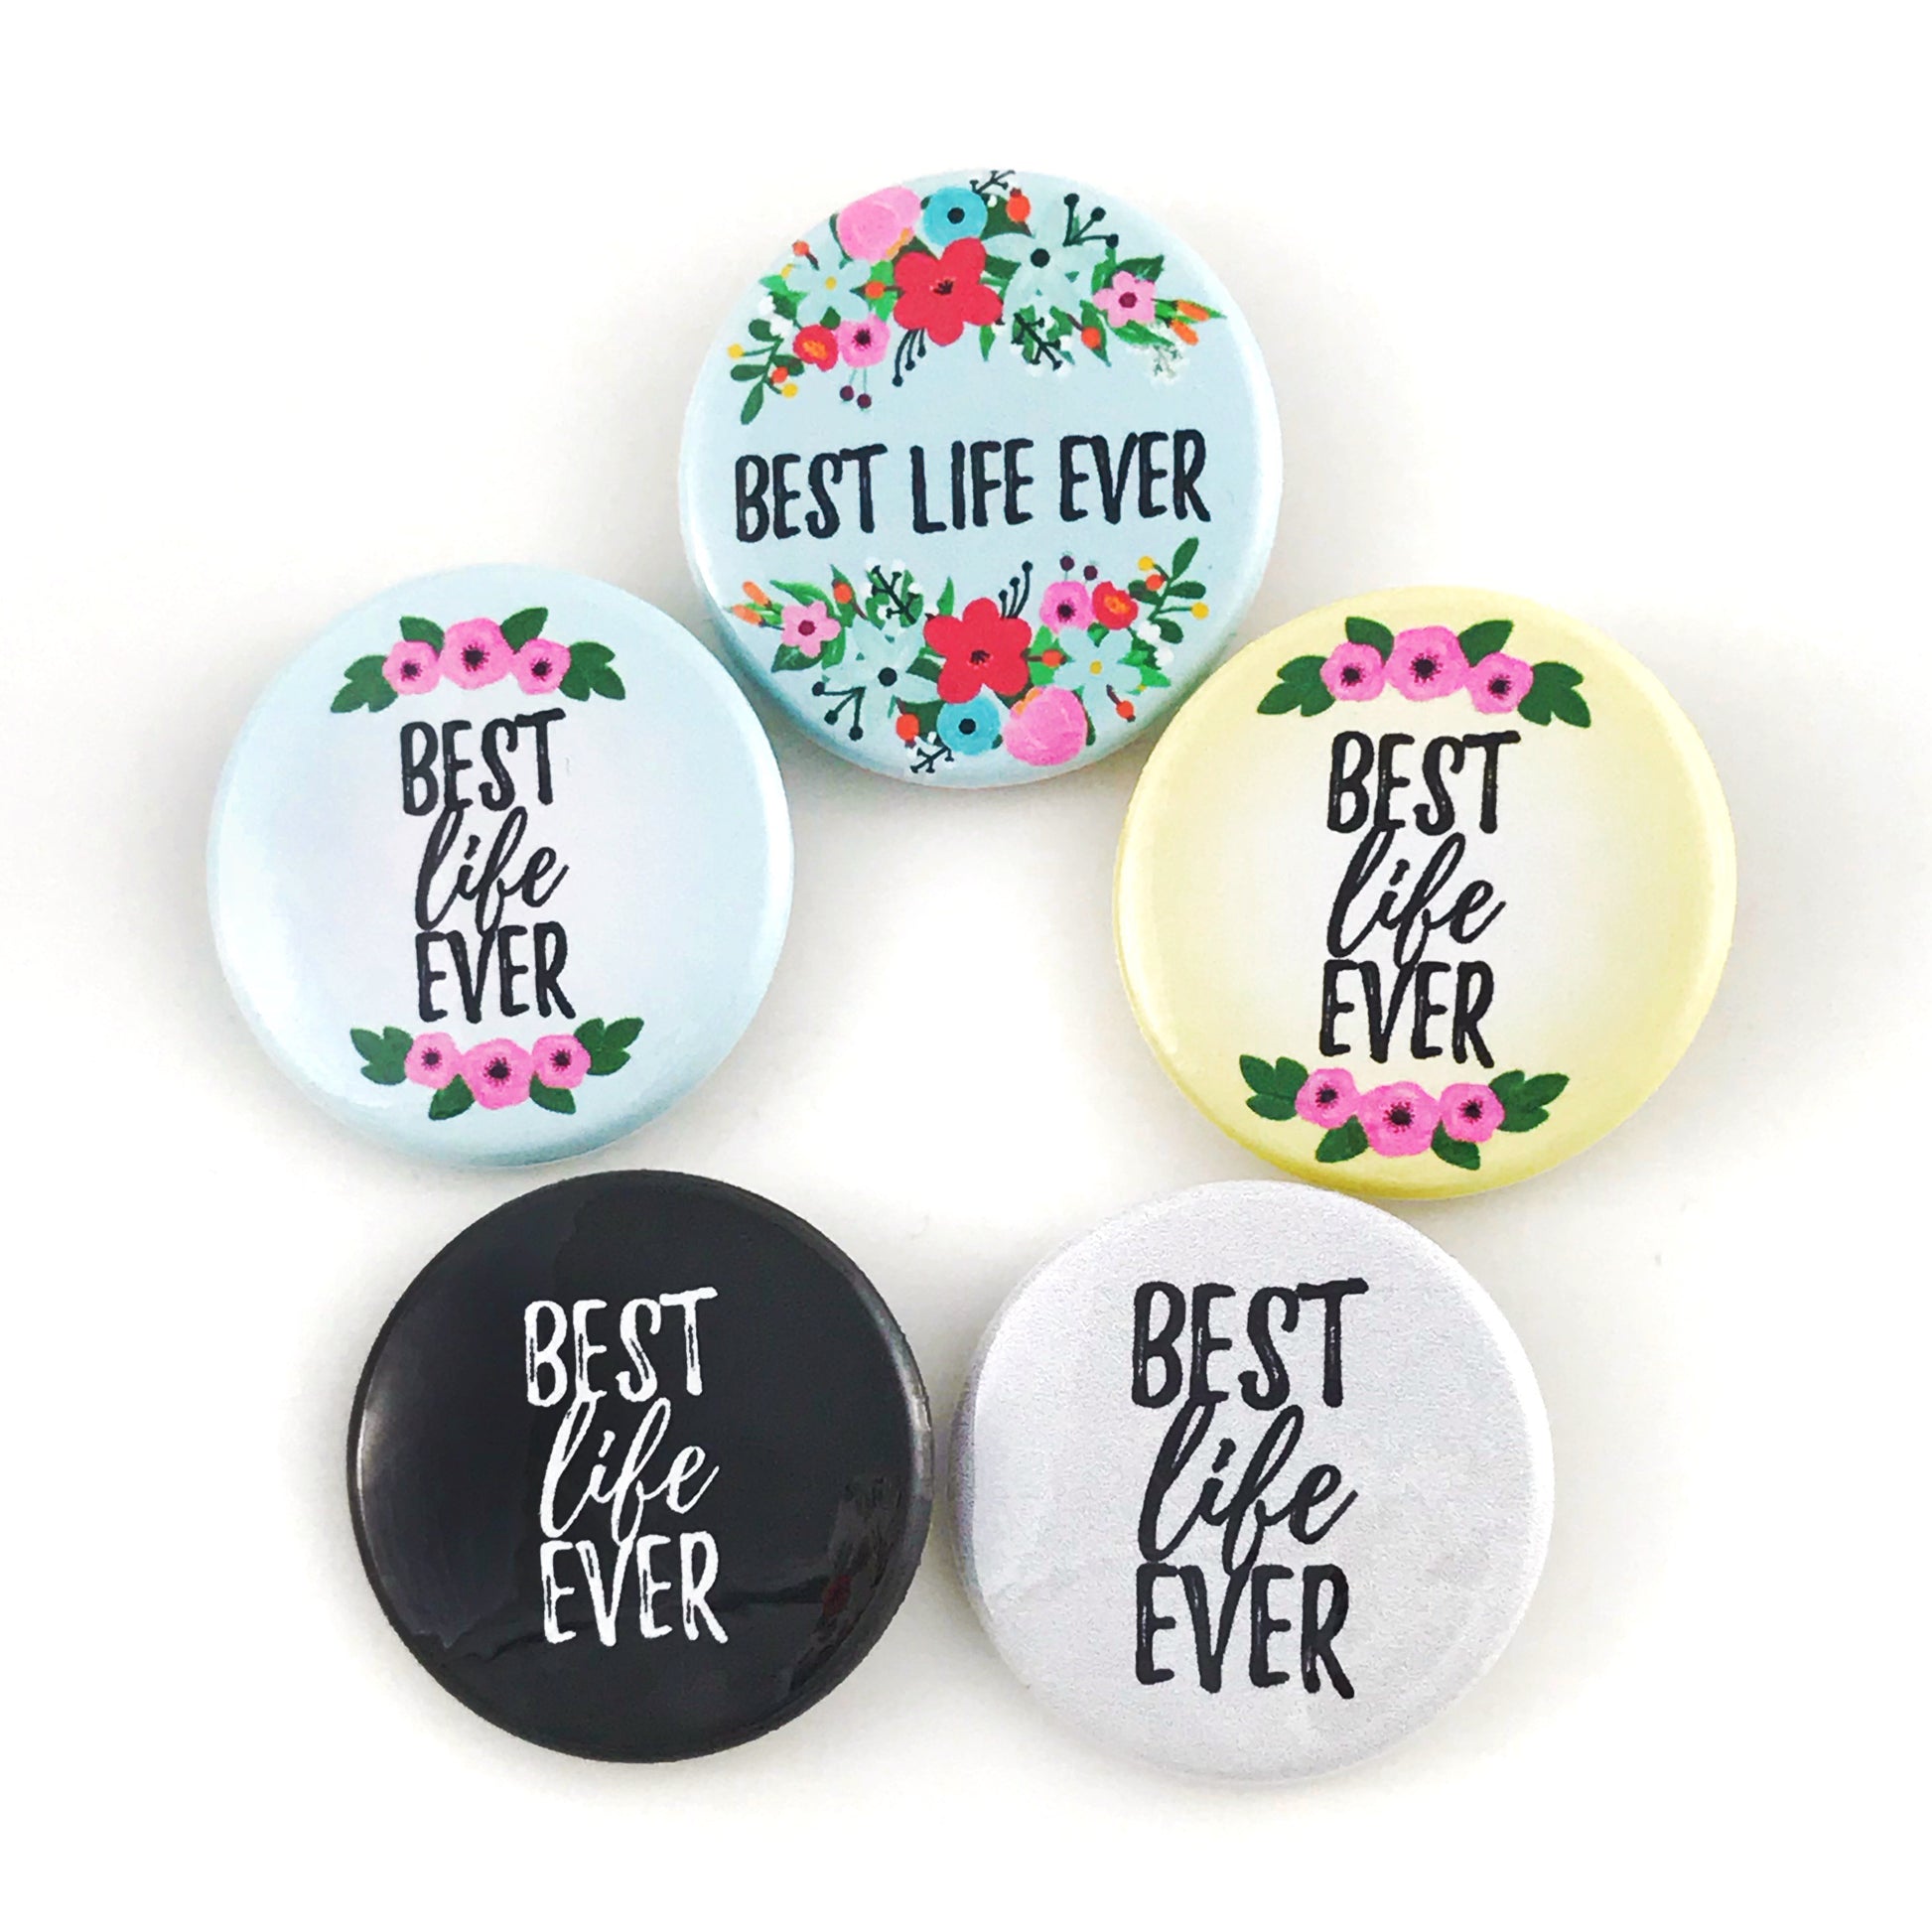 Best Life Ever Button Badge Pins Set - Multicultural Set - jw ministry - jw  pioneer gifts - best life ever - jw pioneer - jw